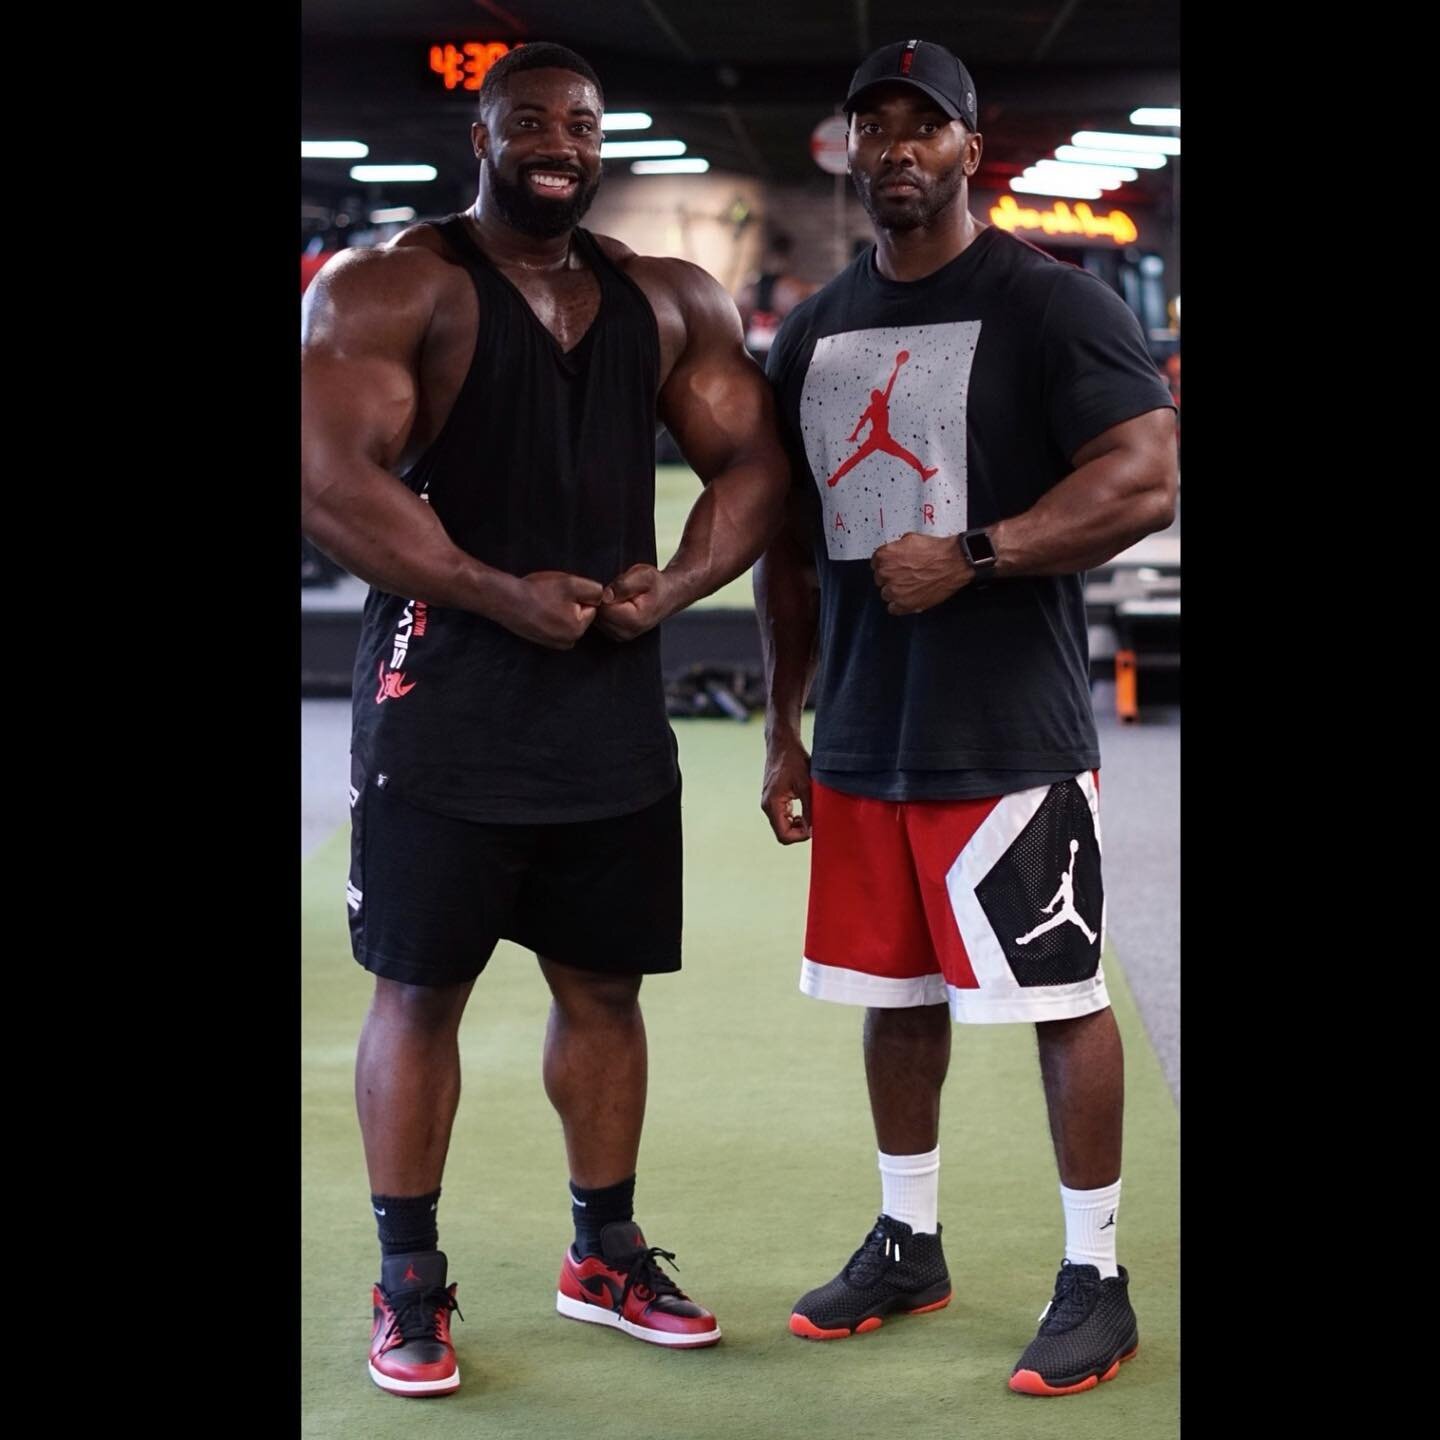 Had a great catch up with my bruddah @marc__hector had a talk on all things business, bodybuilding, family and life. 

Training video soon come.💪🏾💪🏾💪🏾

For online coaching or posing coaching send me a message or go through the links in my bio.
